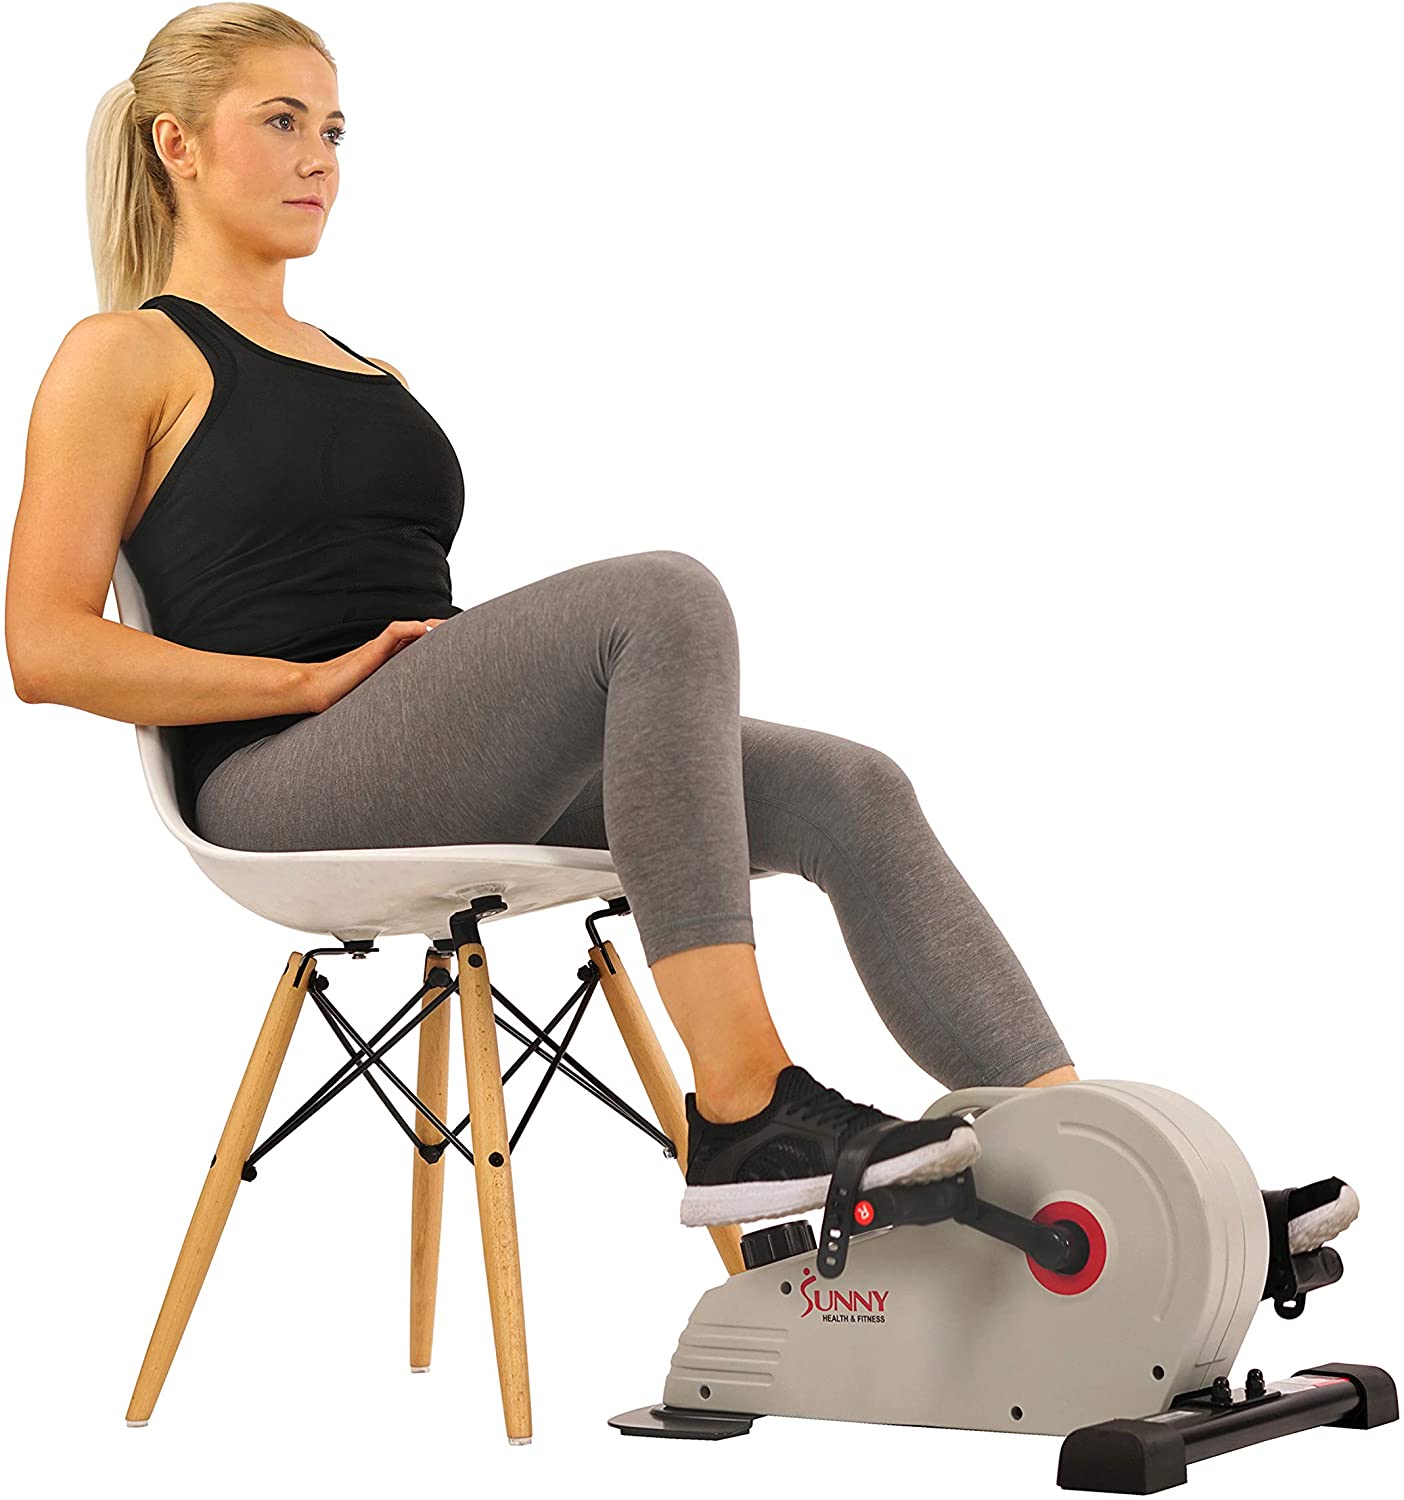 10 Best Under Desk Bikes for All Levels in 2022